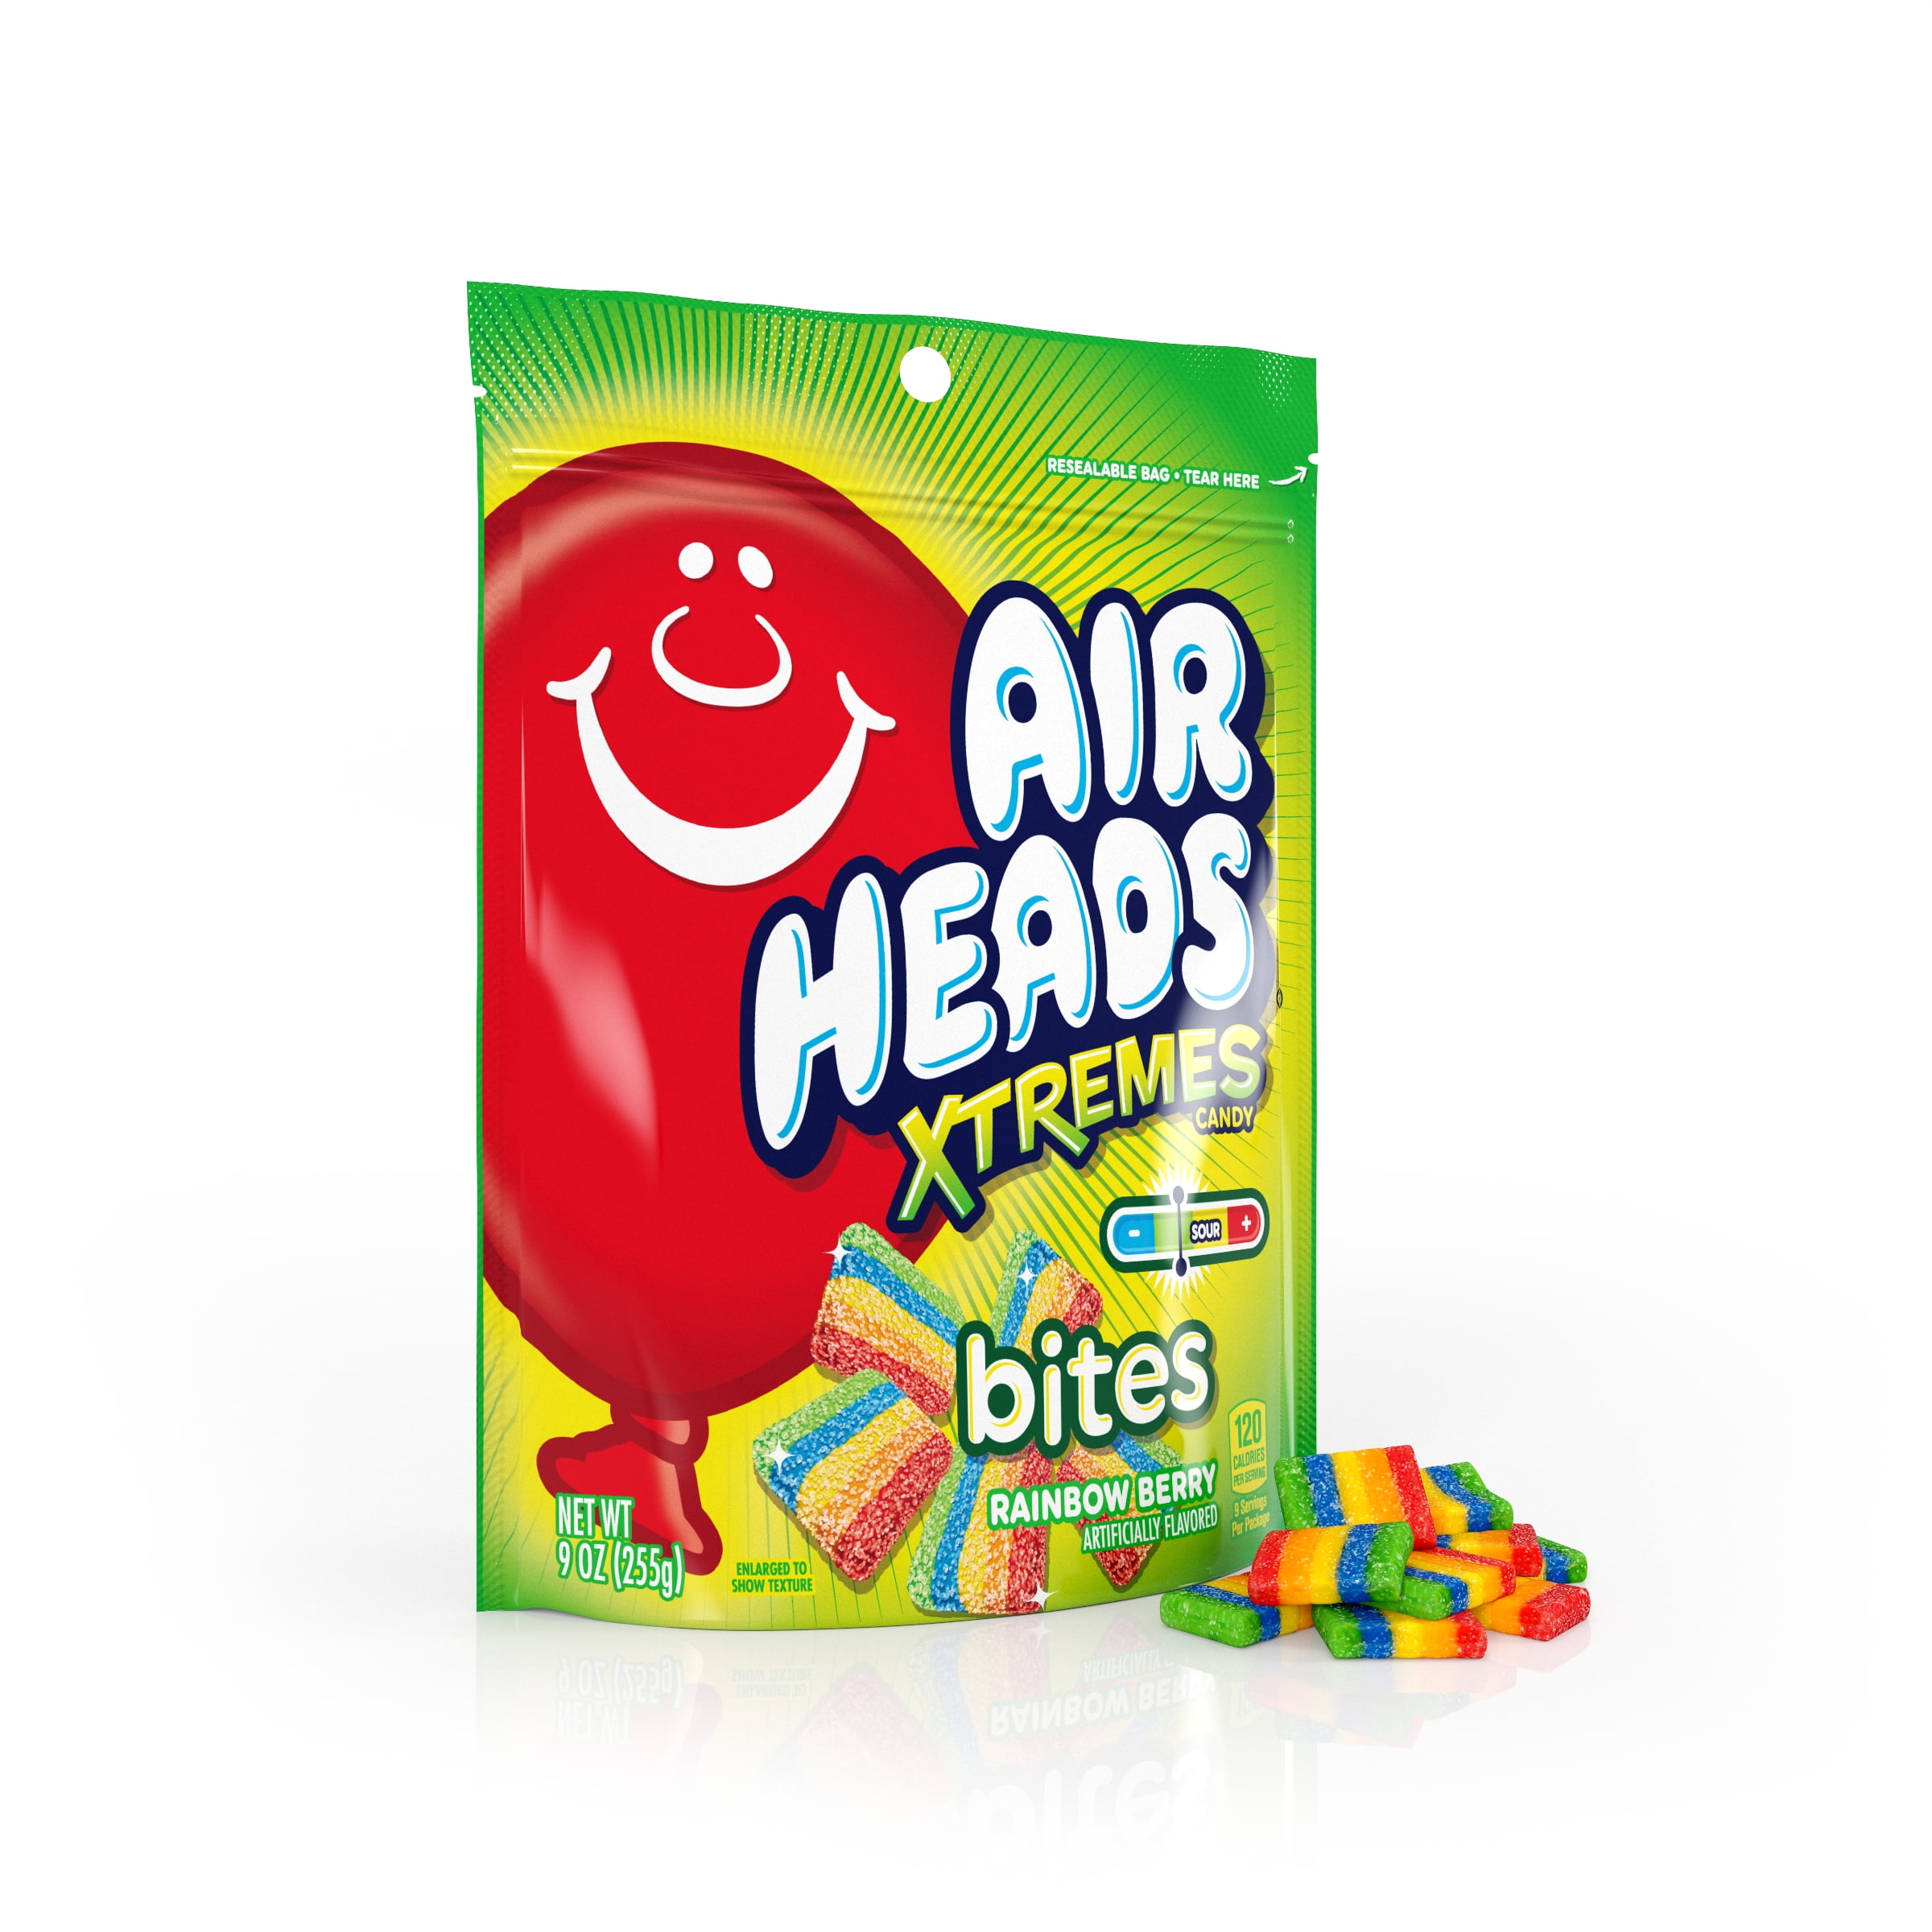 Airheads Xtremes Bites Sweetly Sour Candy Rainbow Berry, 9 Oz